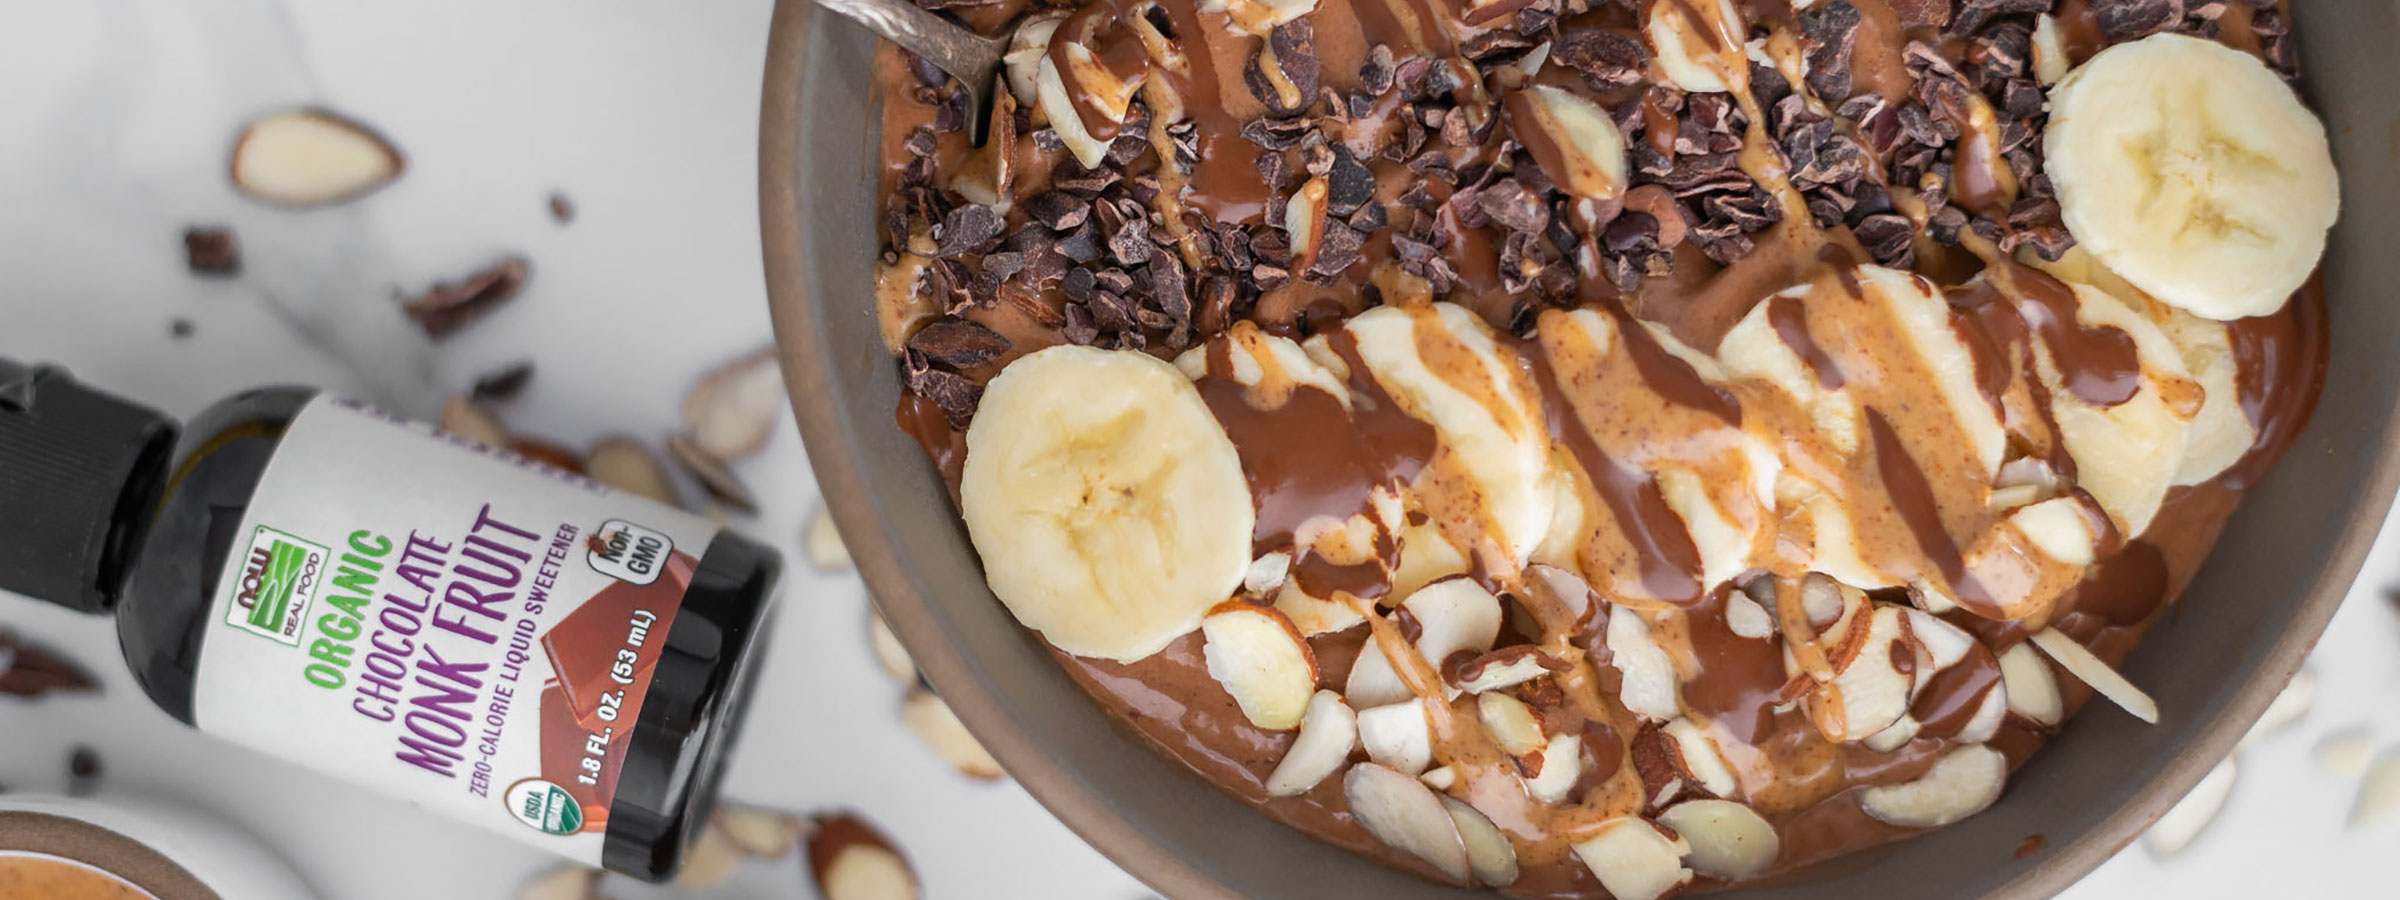 brown bowl filled with double chocolate smoothie bowl mixture including sliced bananas on top and a bottle of NOW Chocolate Monk Fruit sweetener laying to the left